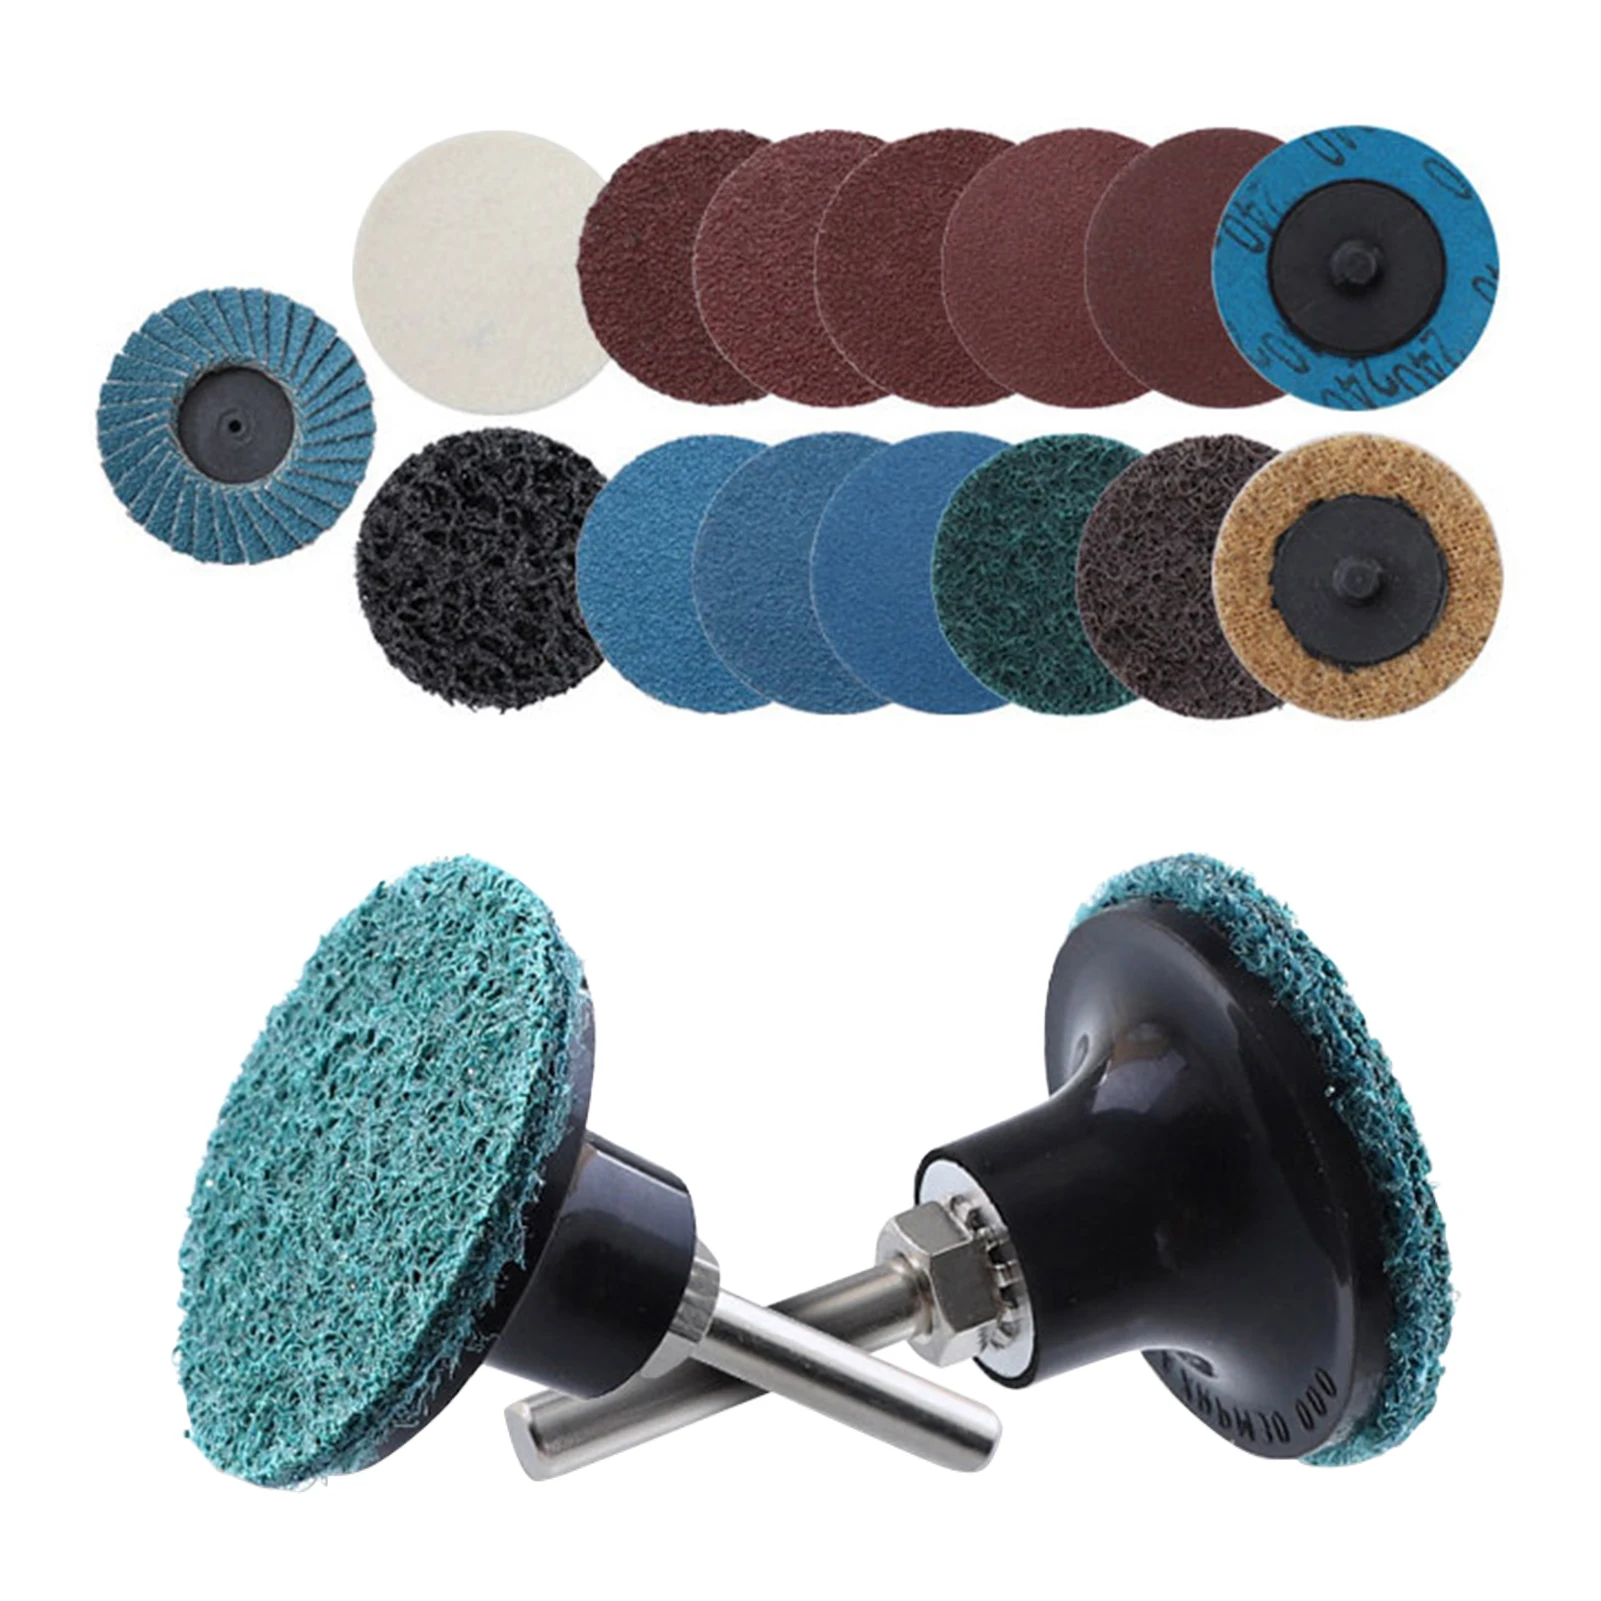 

70pcs Polishing 2 Inch Roll Lock Sanding Discs Set Accessories Rotary Tool Quick Change Burr Finish With 1/4inch Holder